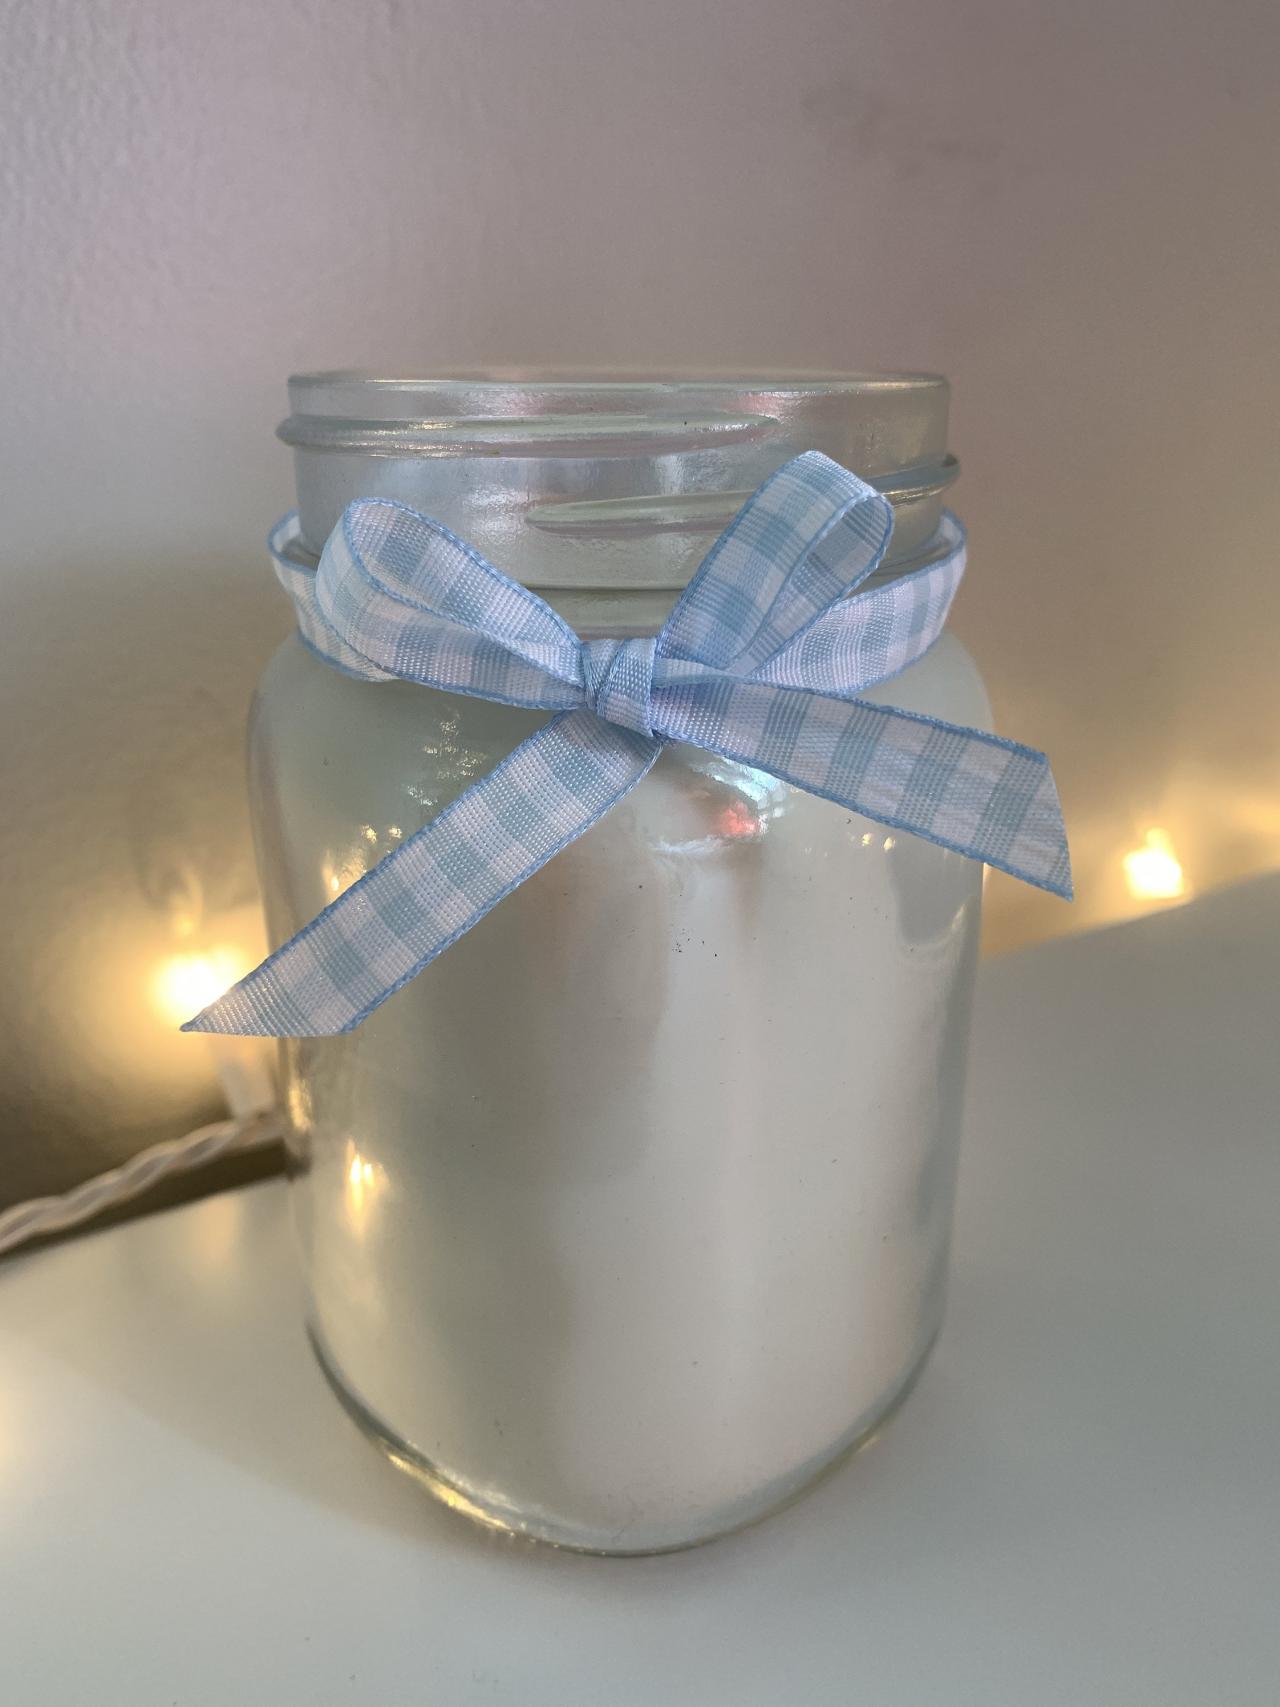 Clean Linen White Candle-pint sized candle-soy candle-scented candle-white candle-wax melts-spa candles-party favors-wedding-home decor-jar